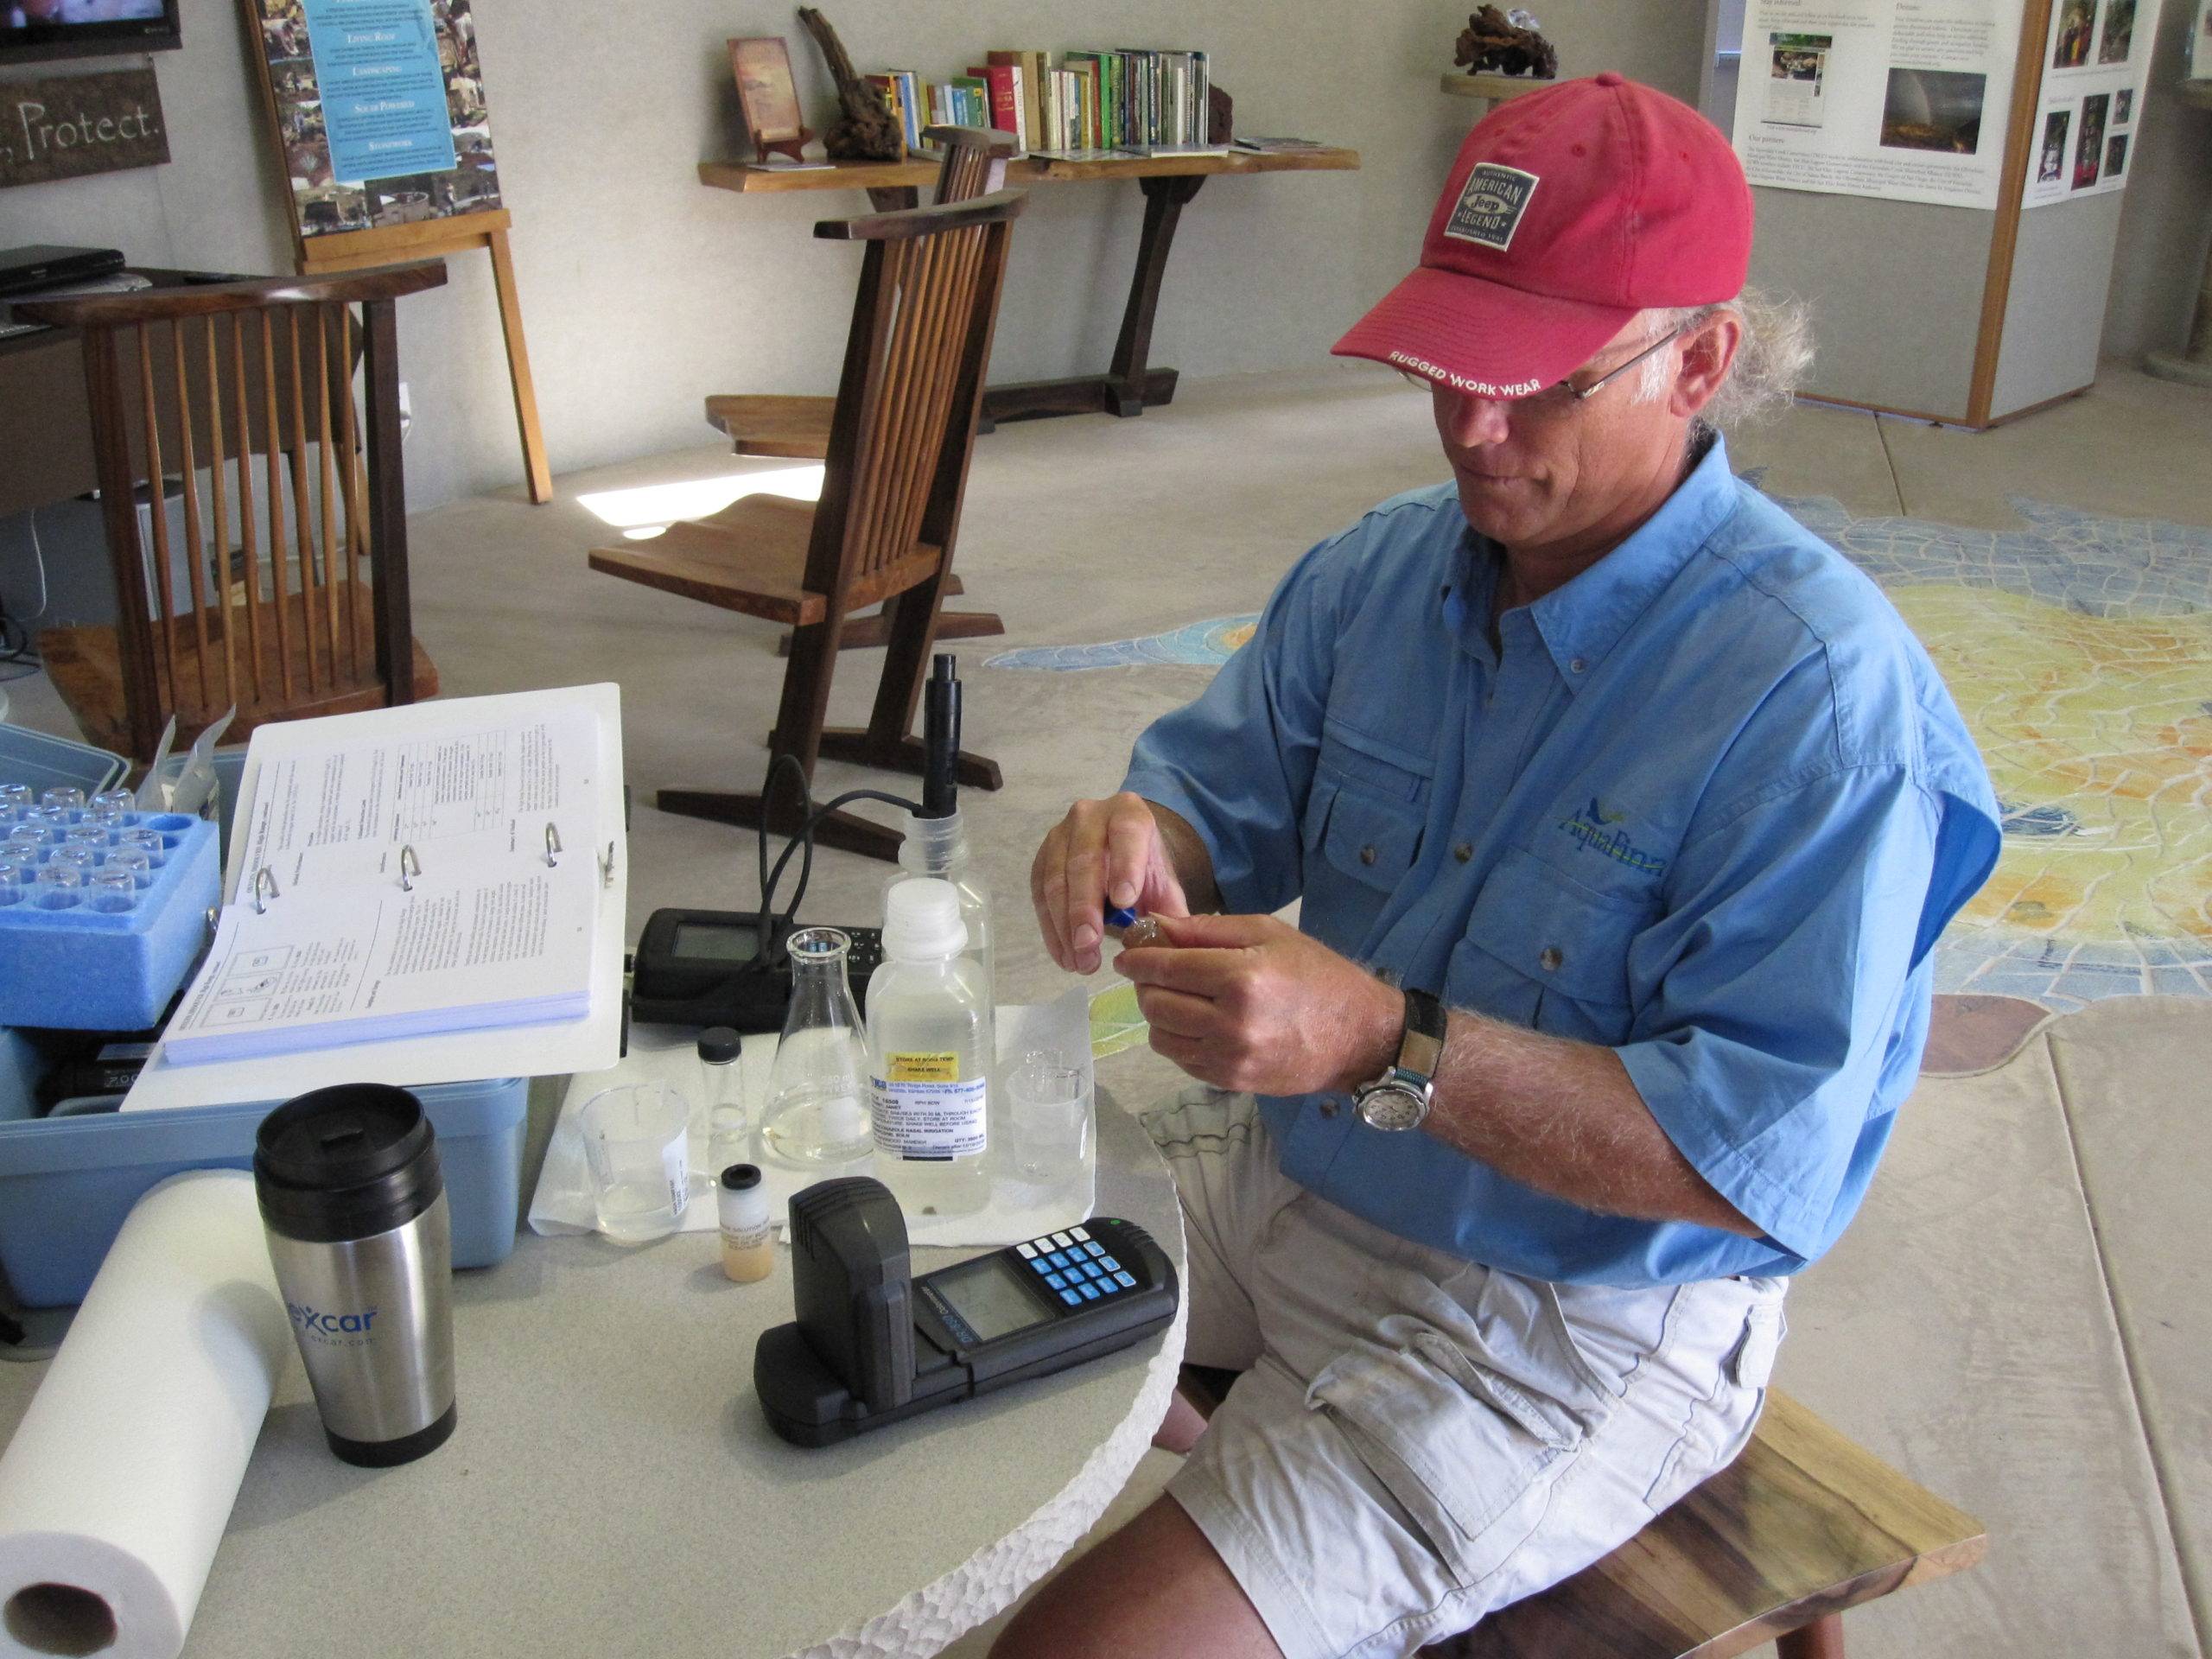 A man is testing the quality of creek water at a scientific station.